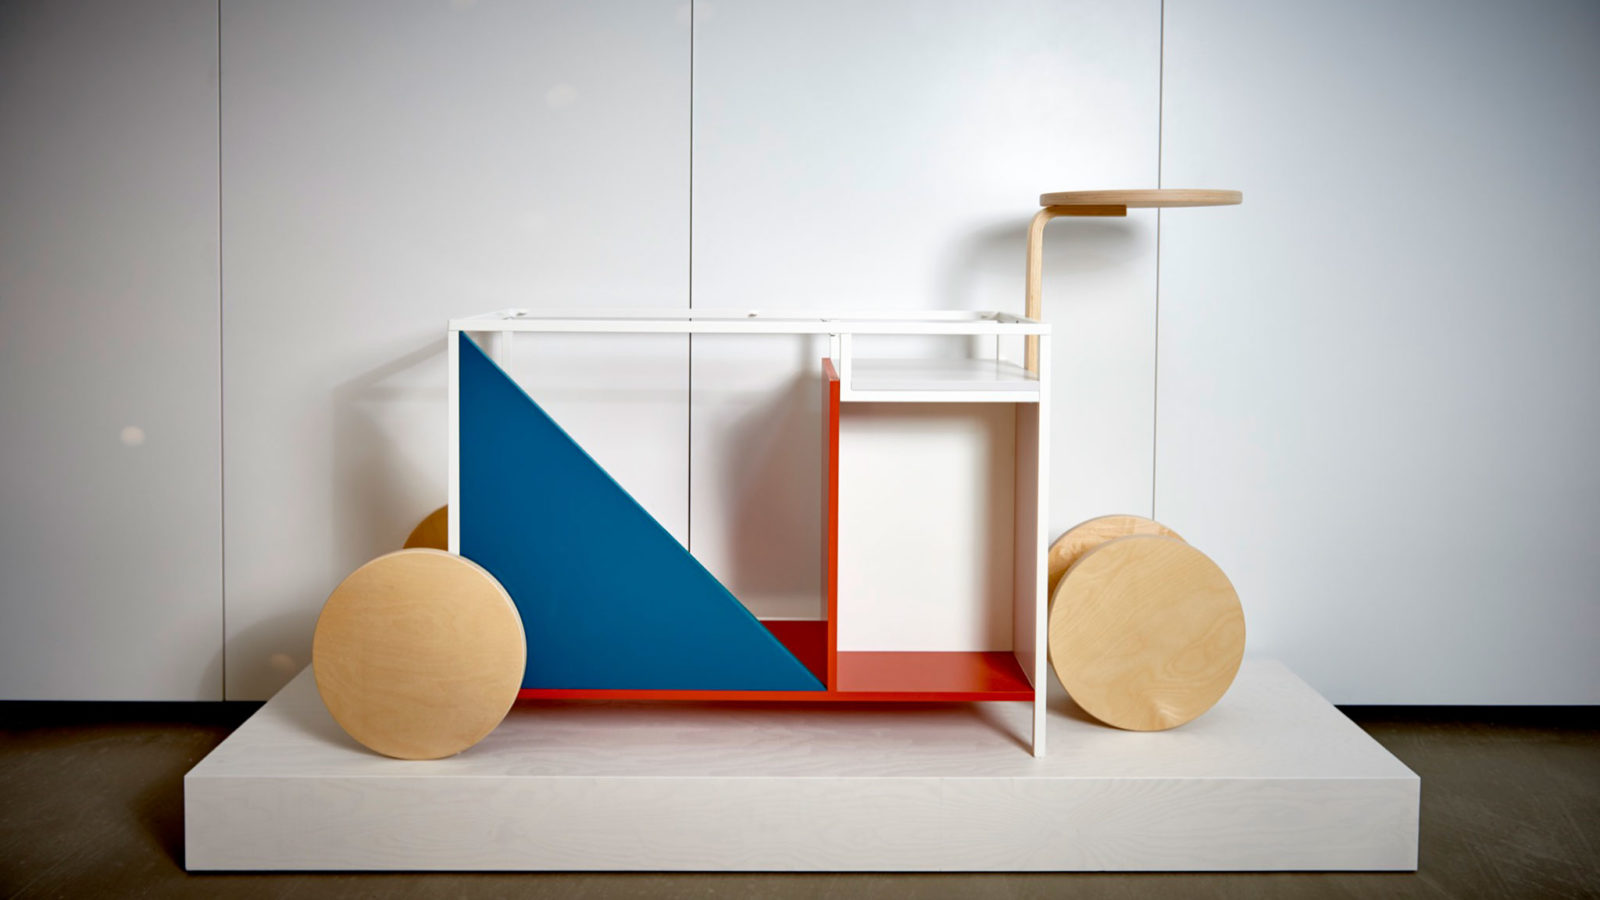 A conceptual piece of furniture made from white, red, blue and unpainted geometrical shapes made from wood.